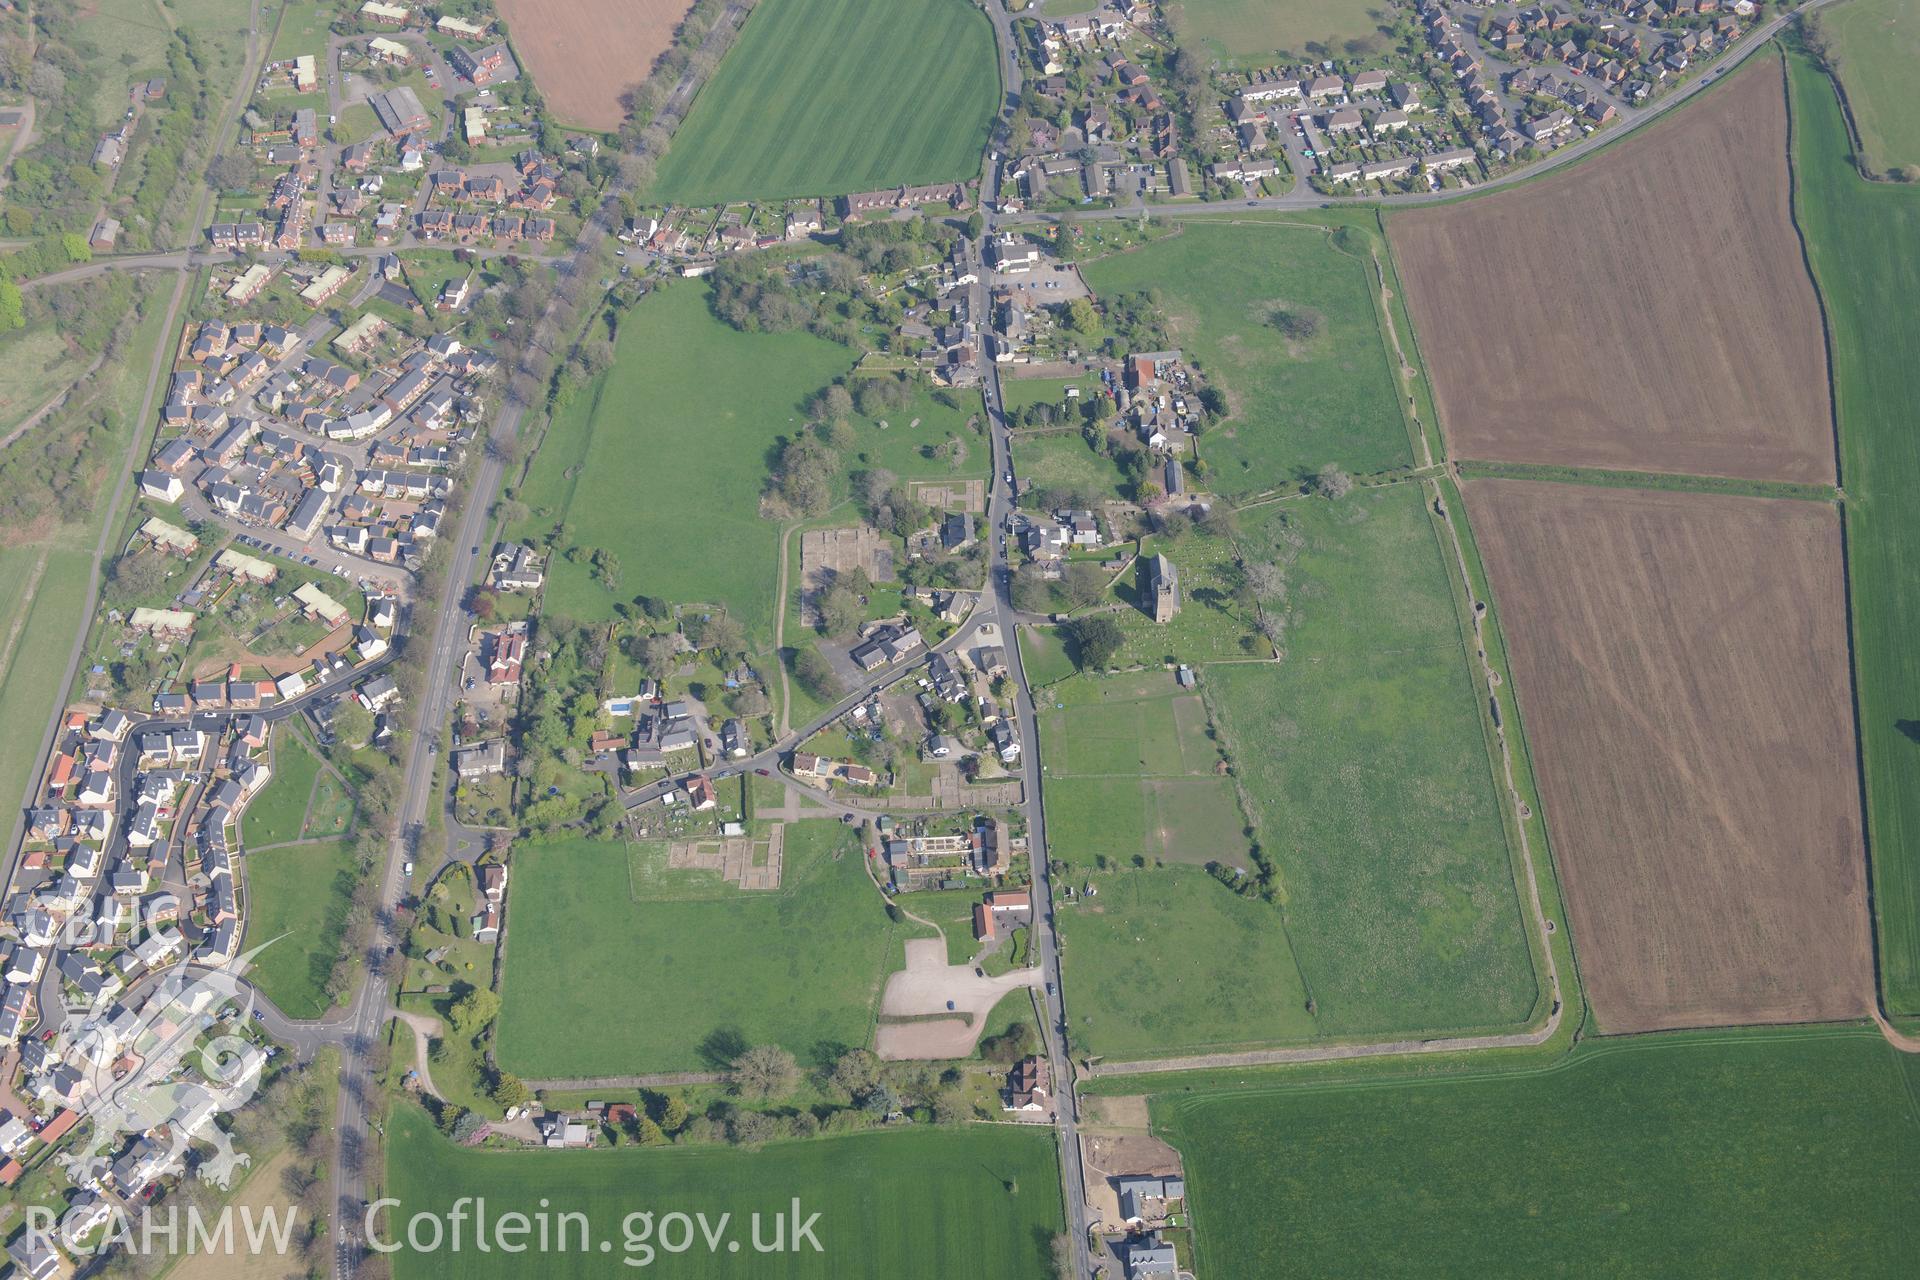 Caerwent village and Roman city including views of the Roman Amphitheatre and Basilica and Forum; Motte; St. Stephen's Church; Caerwent Baptist Chapel; Caerwent Institute Caerwent House; Great House and West Gate Farm. Oblique aerial photograph taken during the Royal Commission's programme of archaeological aerial reconnaissance by Toby Driver on 21st April 2015.